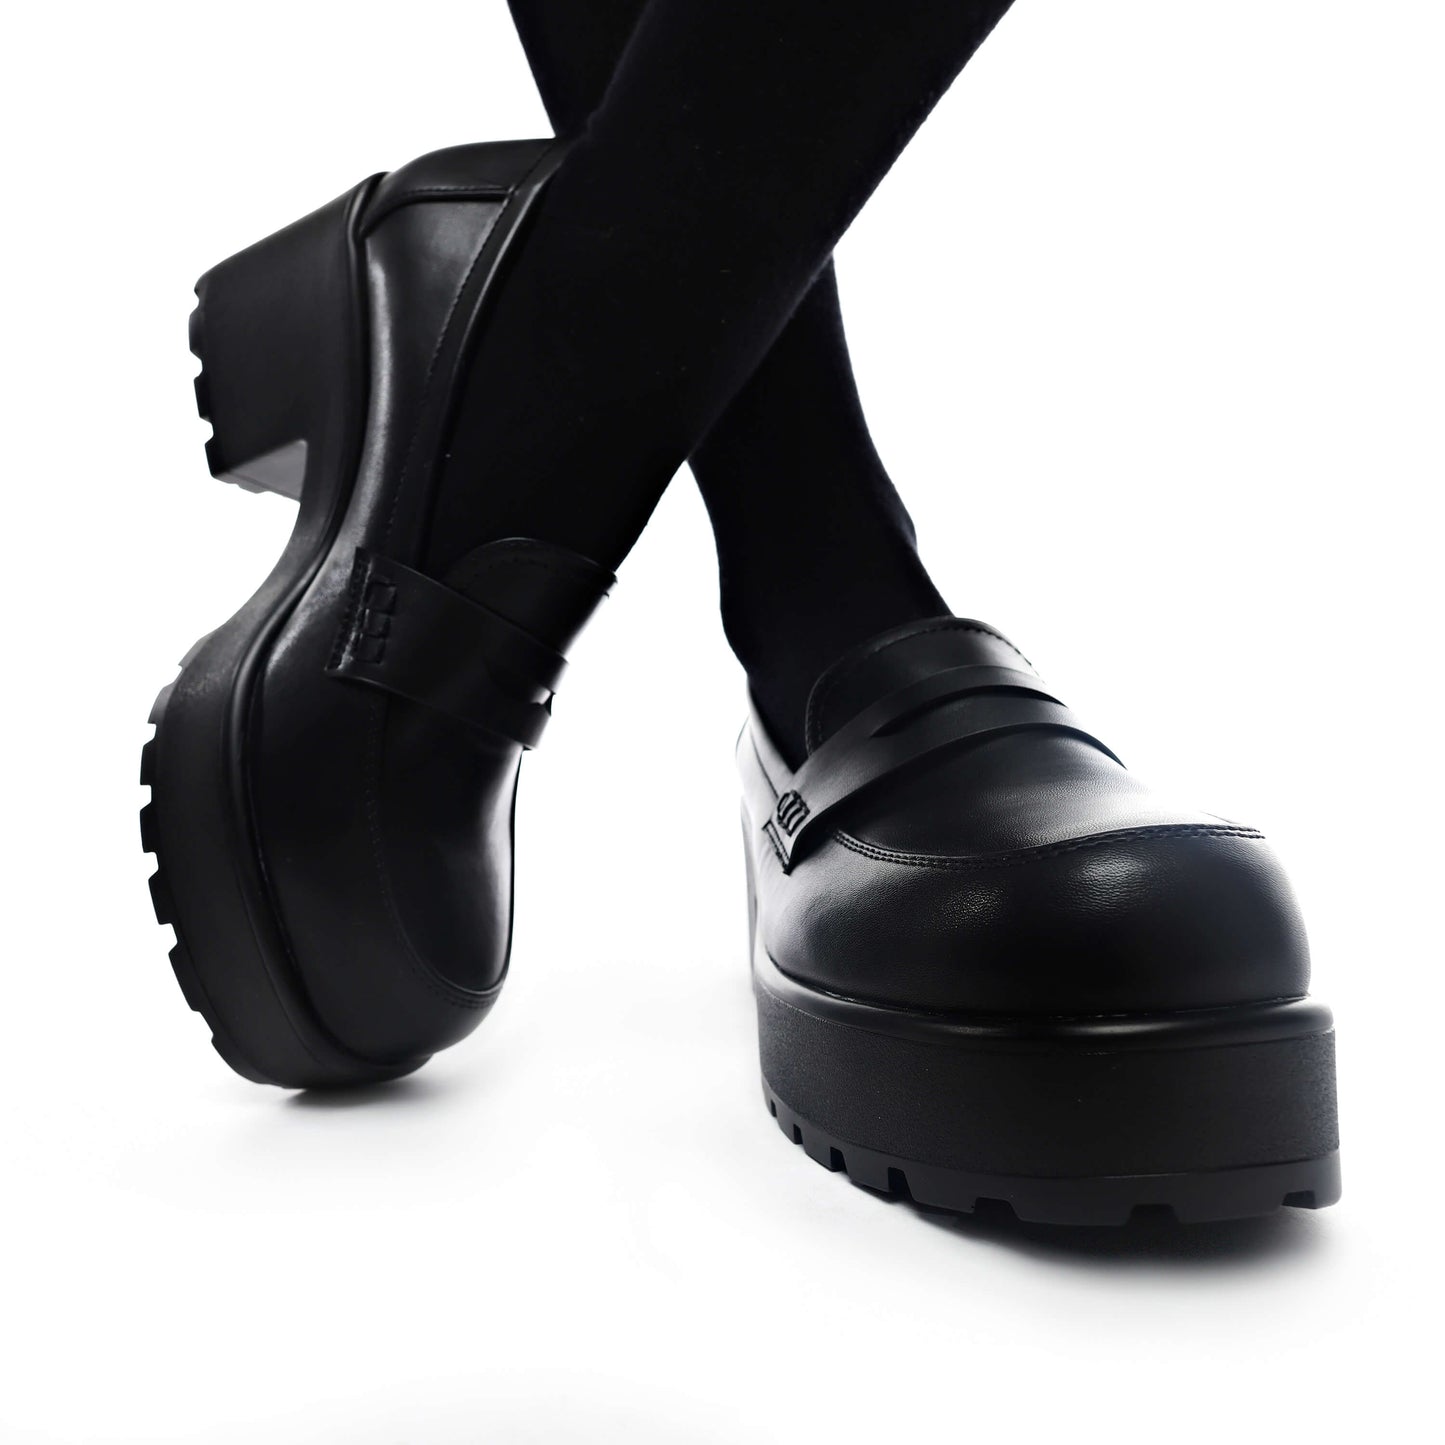 Vigo Classic Chunky Shoes - Shoes - KOI Footwear - Black - Side and Front View